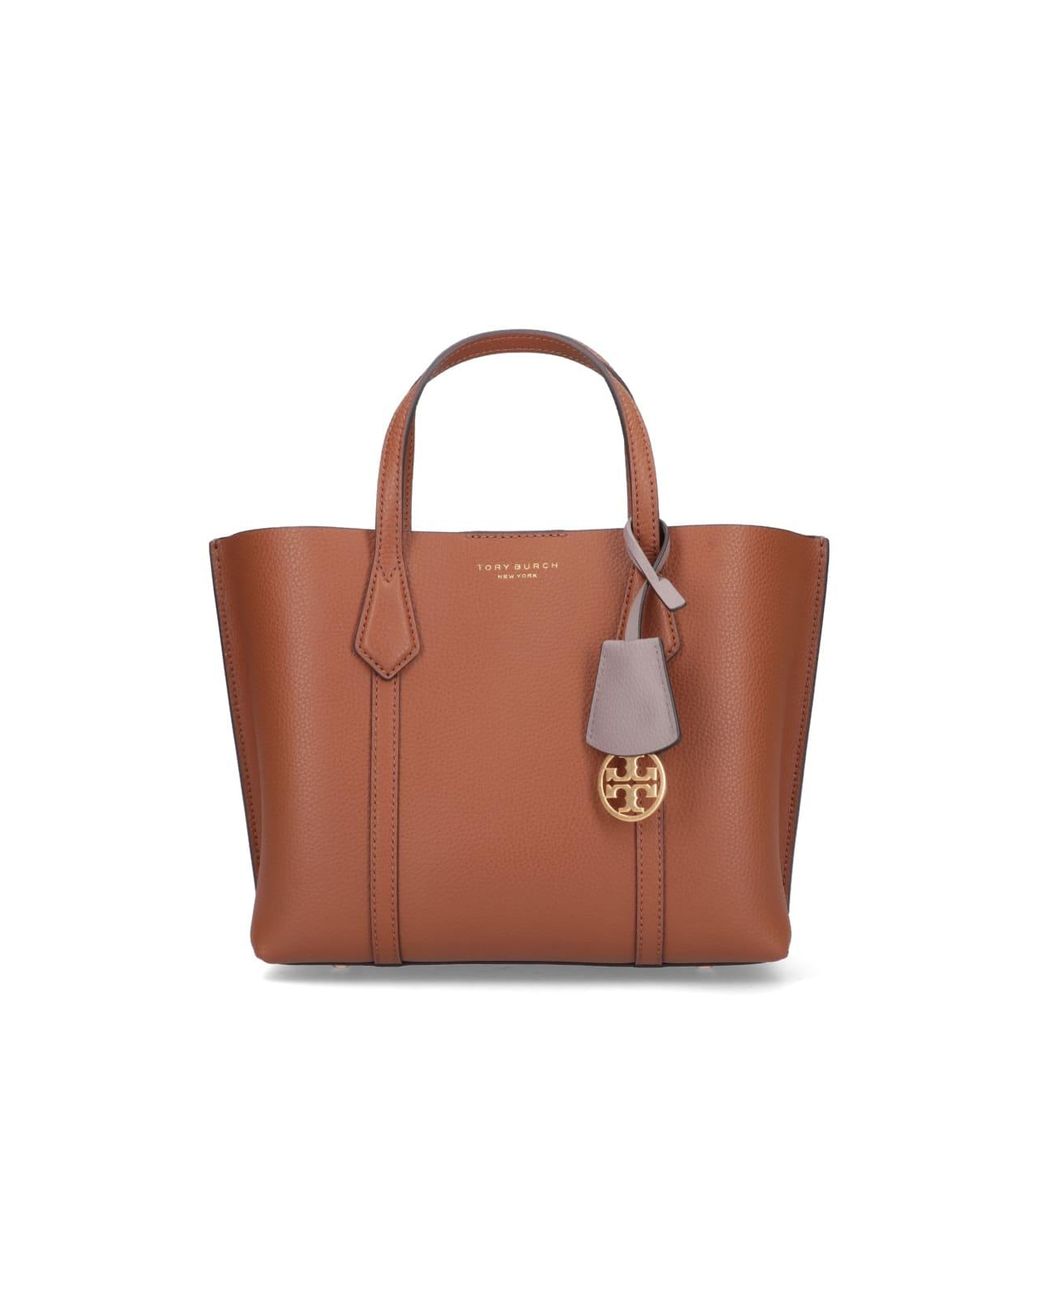 Tory Burch Small 'perry' Shopping Bag in Brown